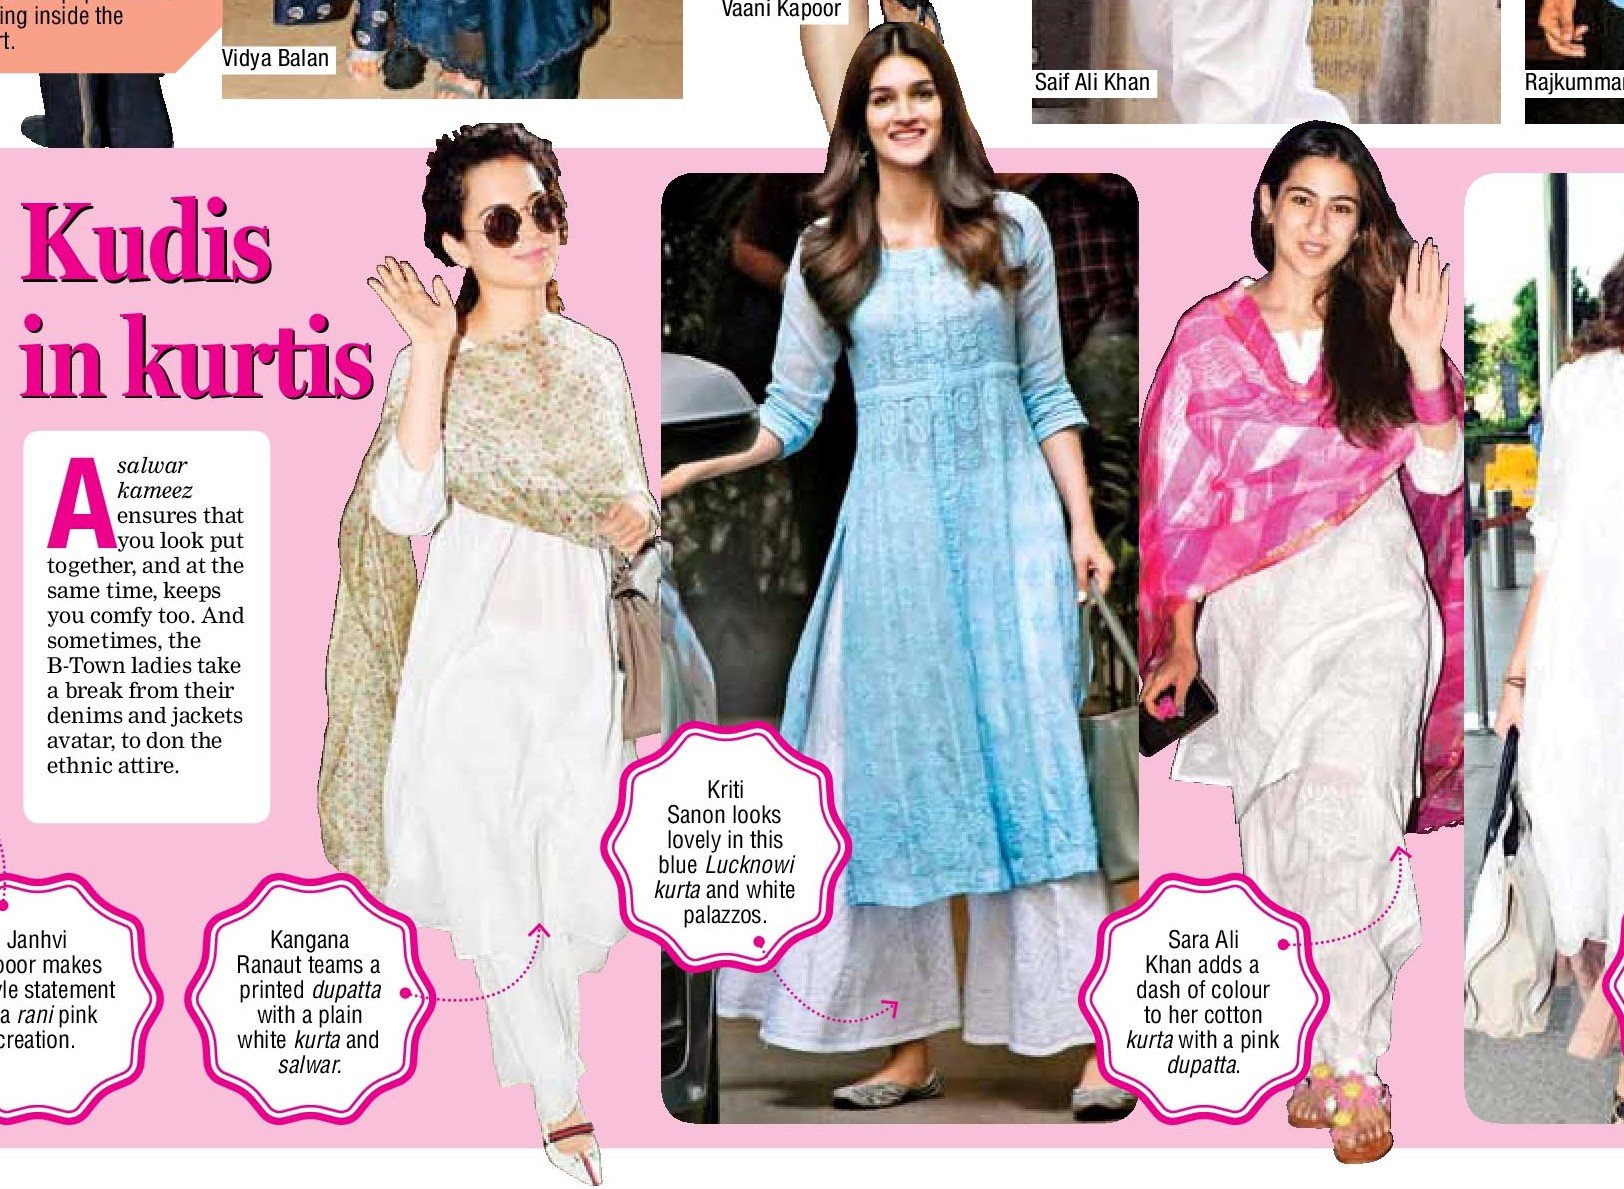 All the times Kriti Sanon wowed us with her stylish looks | Lifestyle  Gallery News - The Indian Express